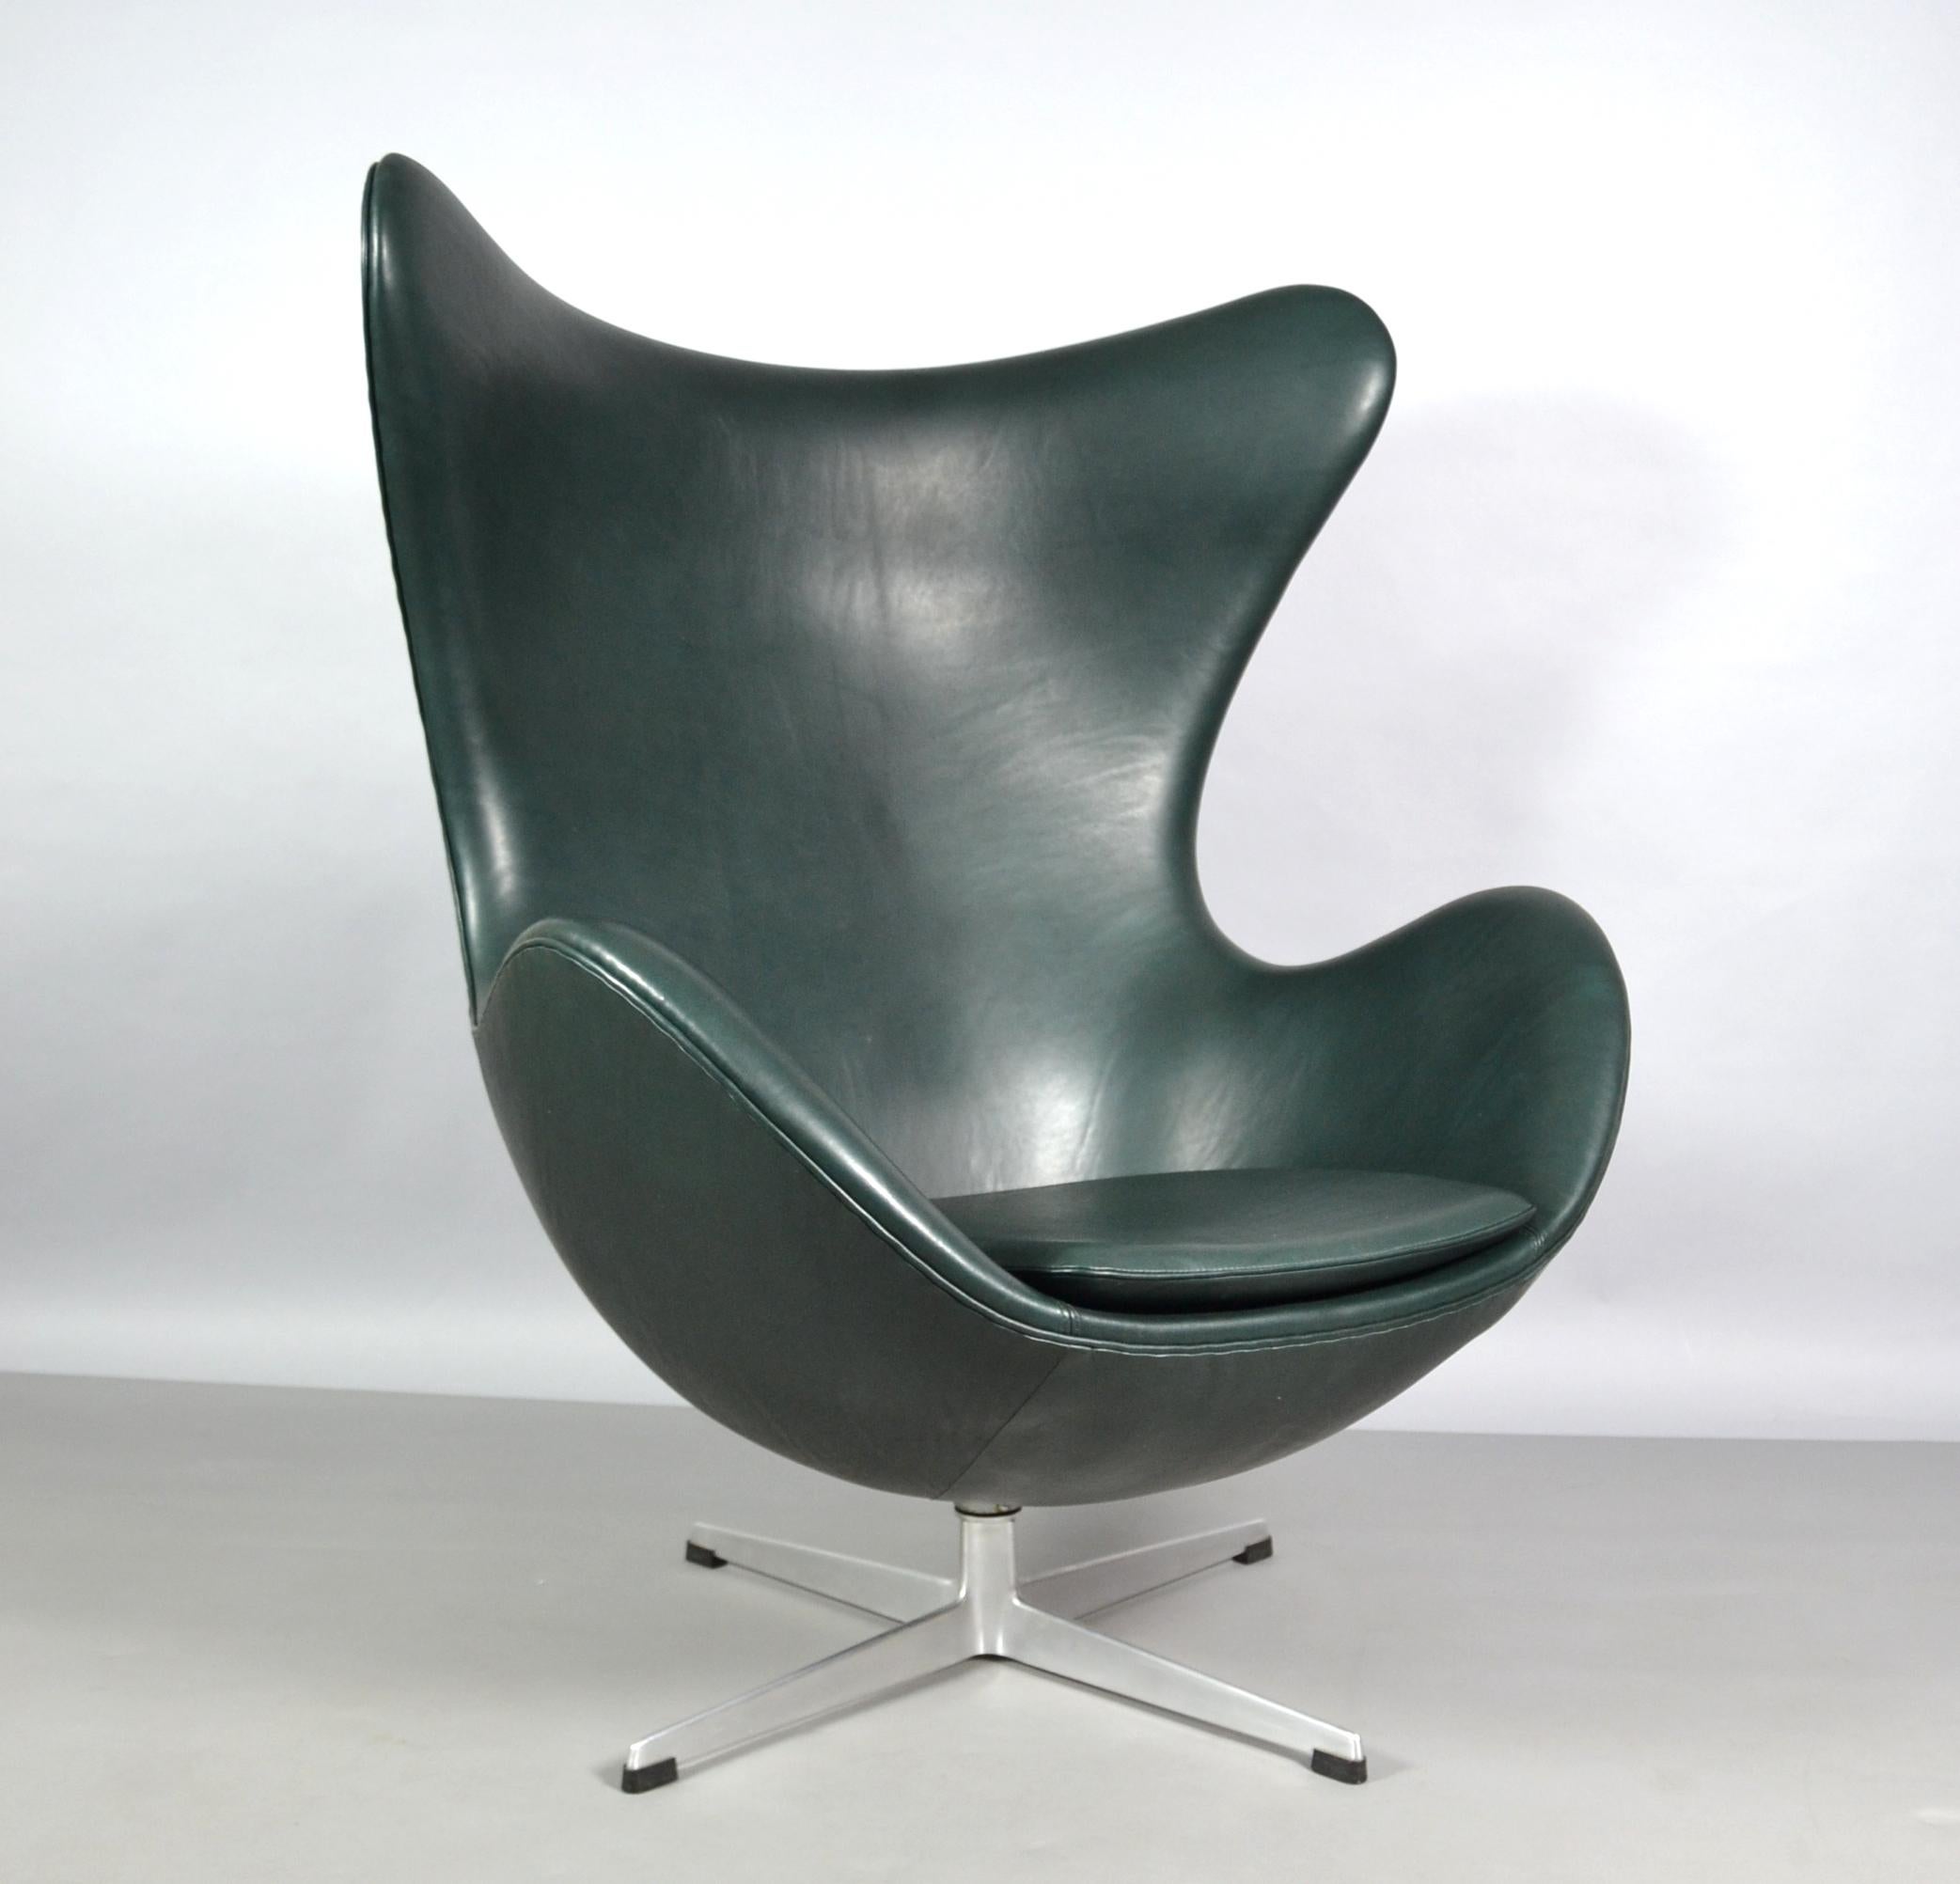 Design: Arne Jacobsen from 1958
Manufacturer: Fritz Hansen before 1975
Model: Egg chair
Aluminum base with old original foot, only produced until 1975.
New upholstery in green aniline leather.
Arne Jacobsen (1902-1971 Copenhagen) architect and